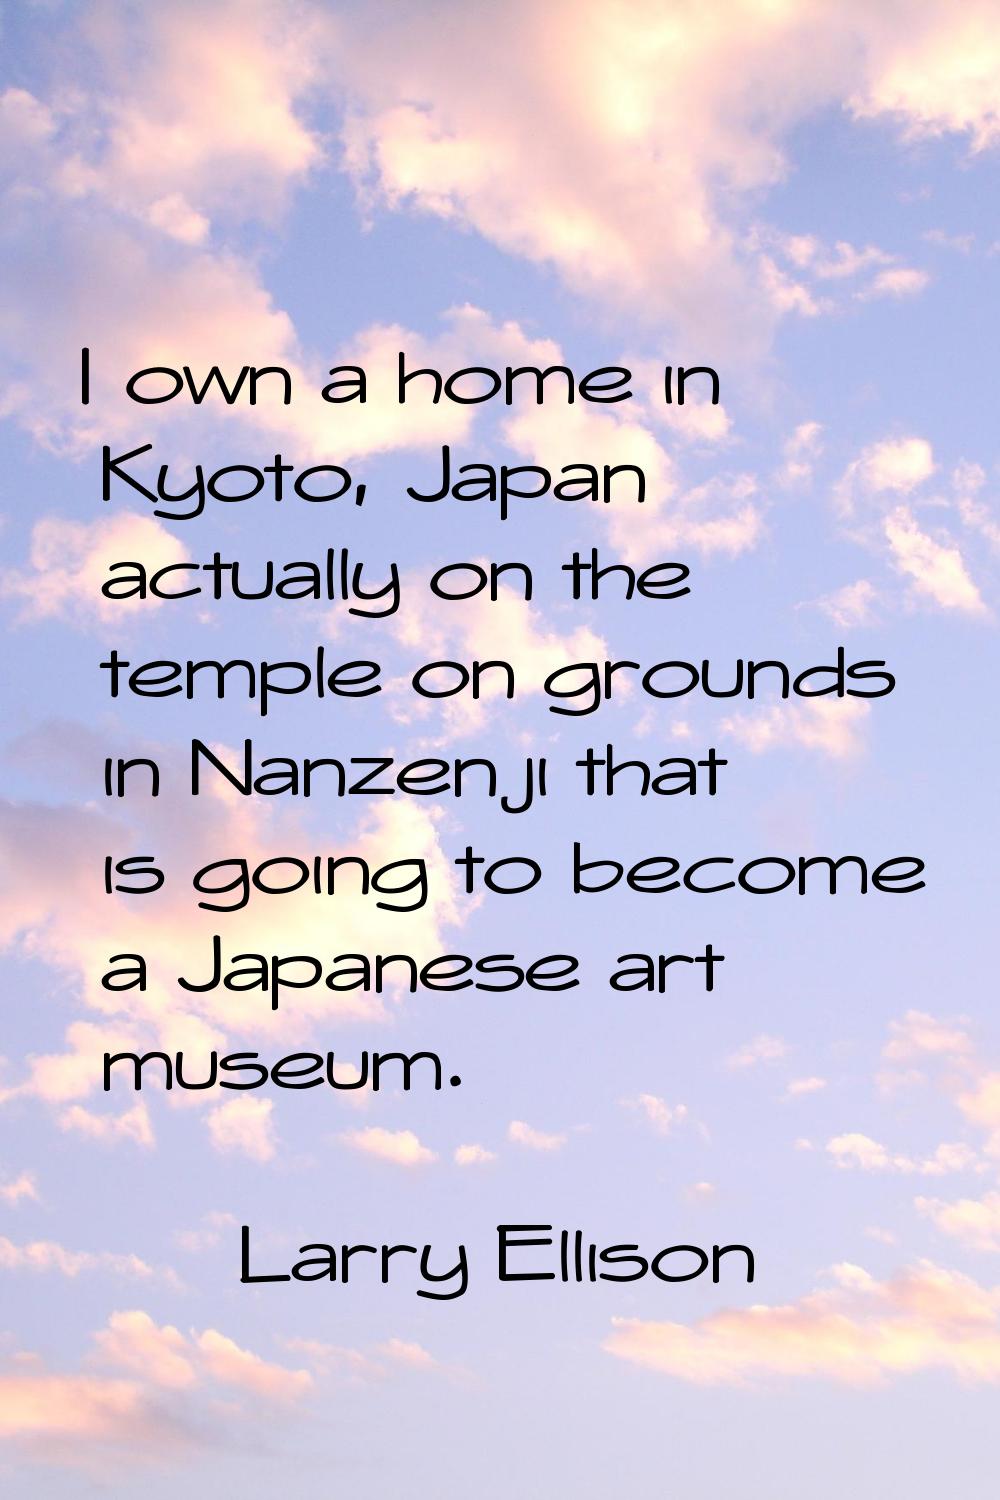 I own a home in Kyoto, Japan actually on the temple on grounds in Nanzenji that is going to become 